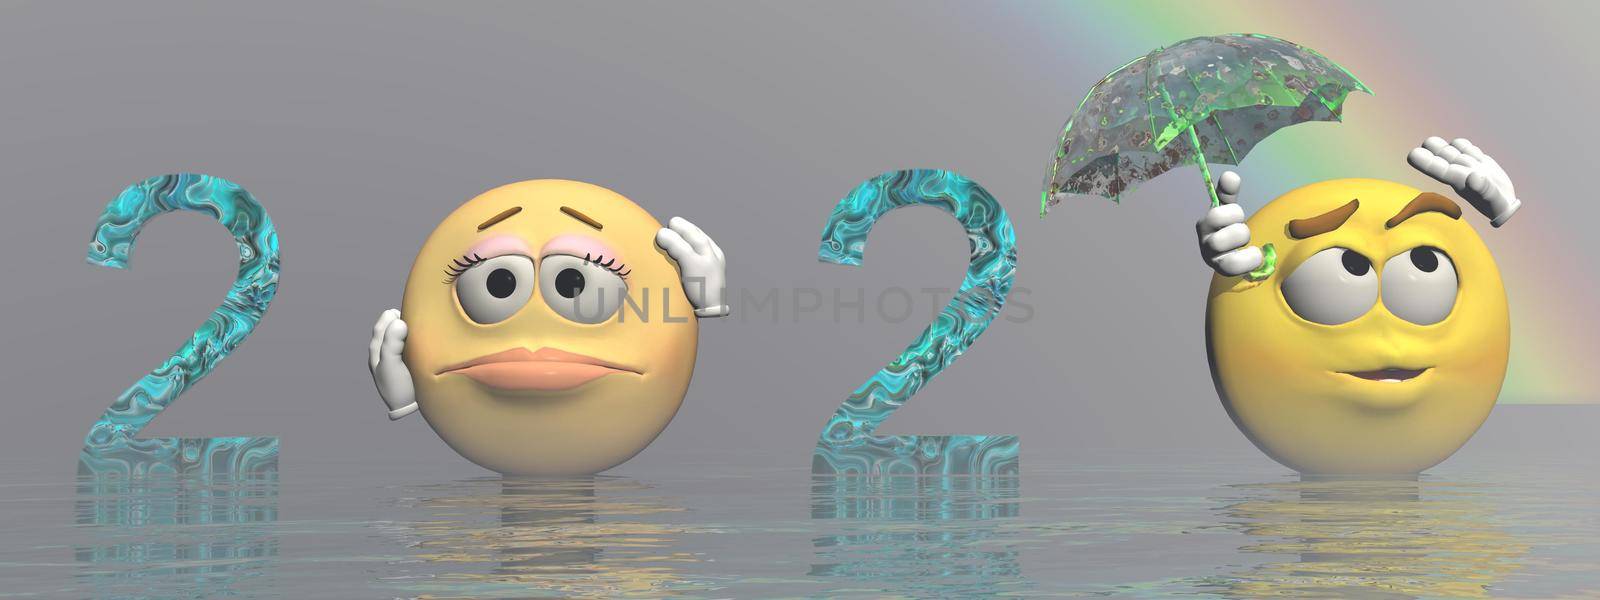 happy new year 2020 with smileys - 3d rendering by mariephotos